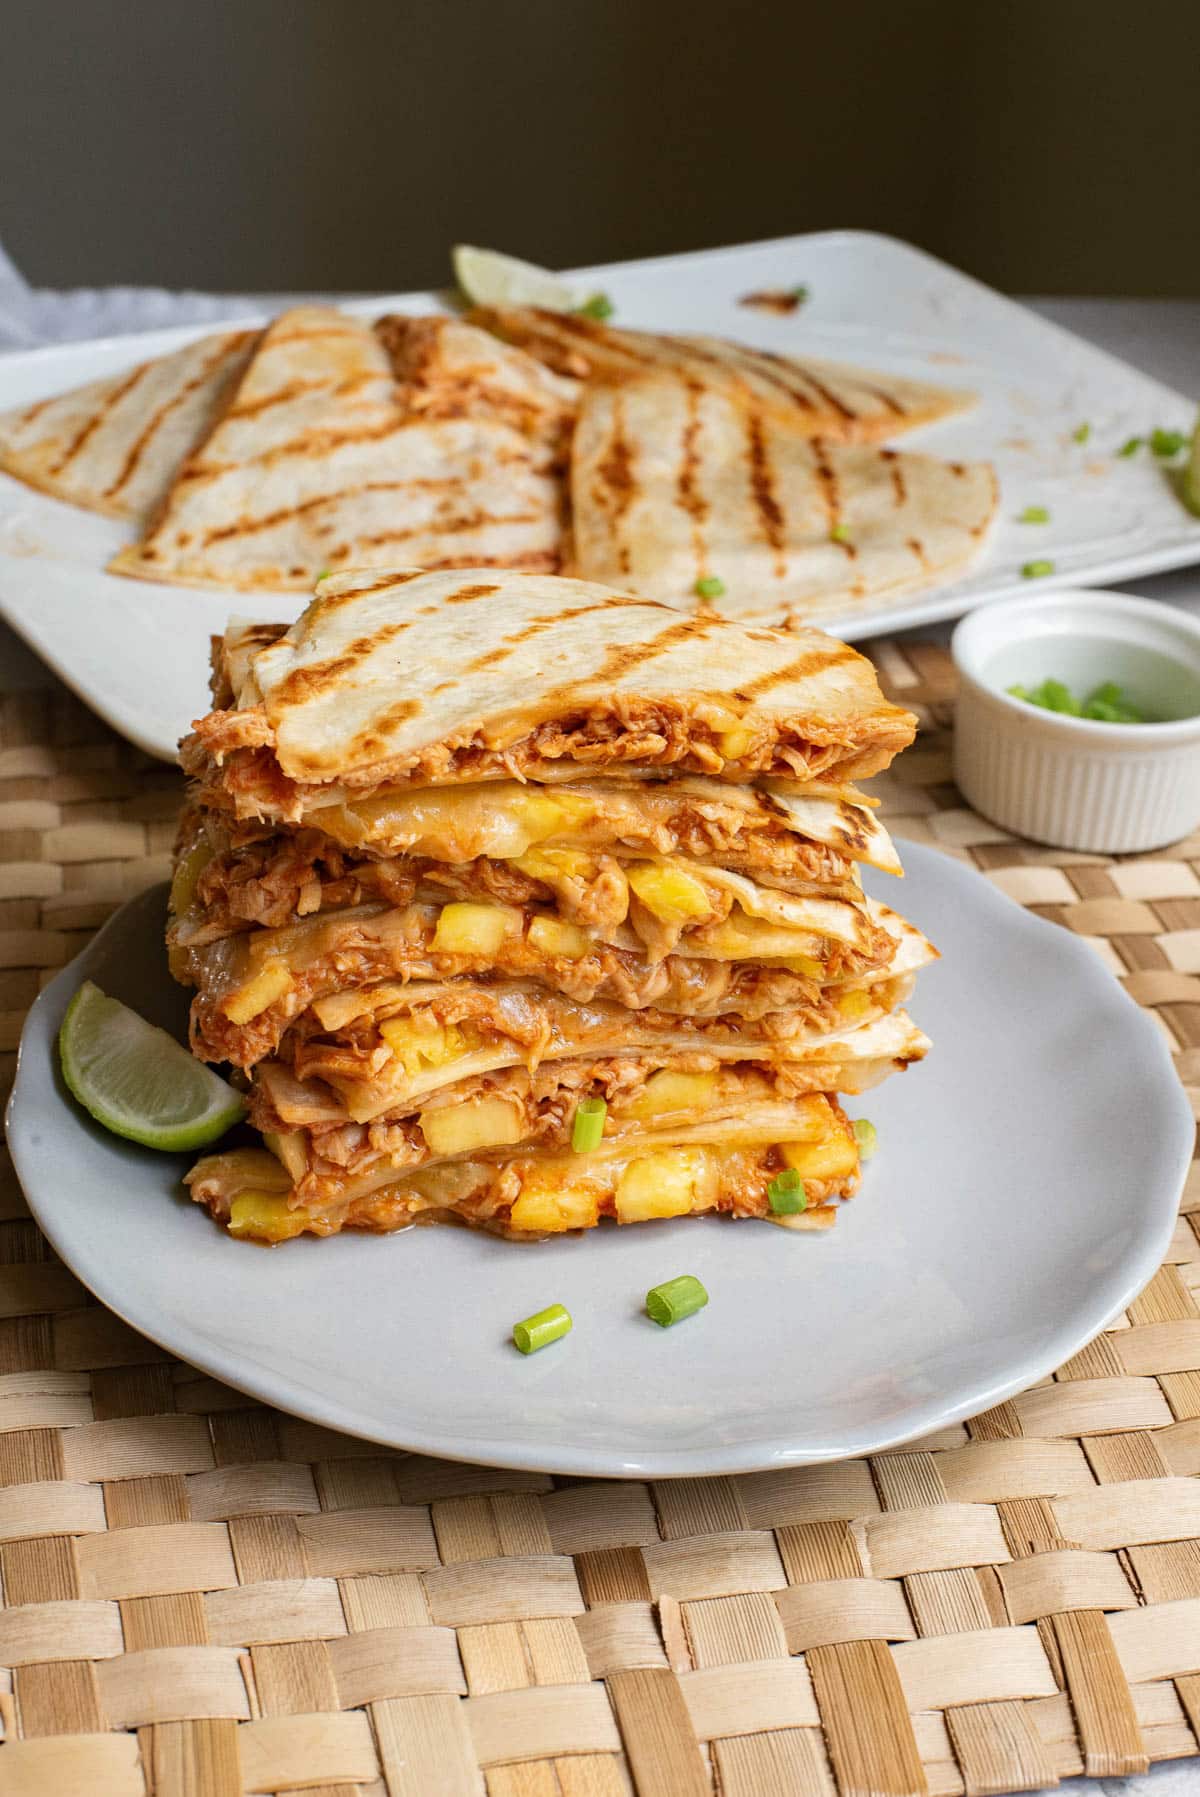 Chicken Quesadillas stacked on a white plate.
